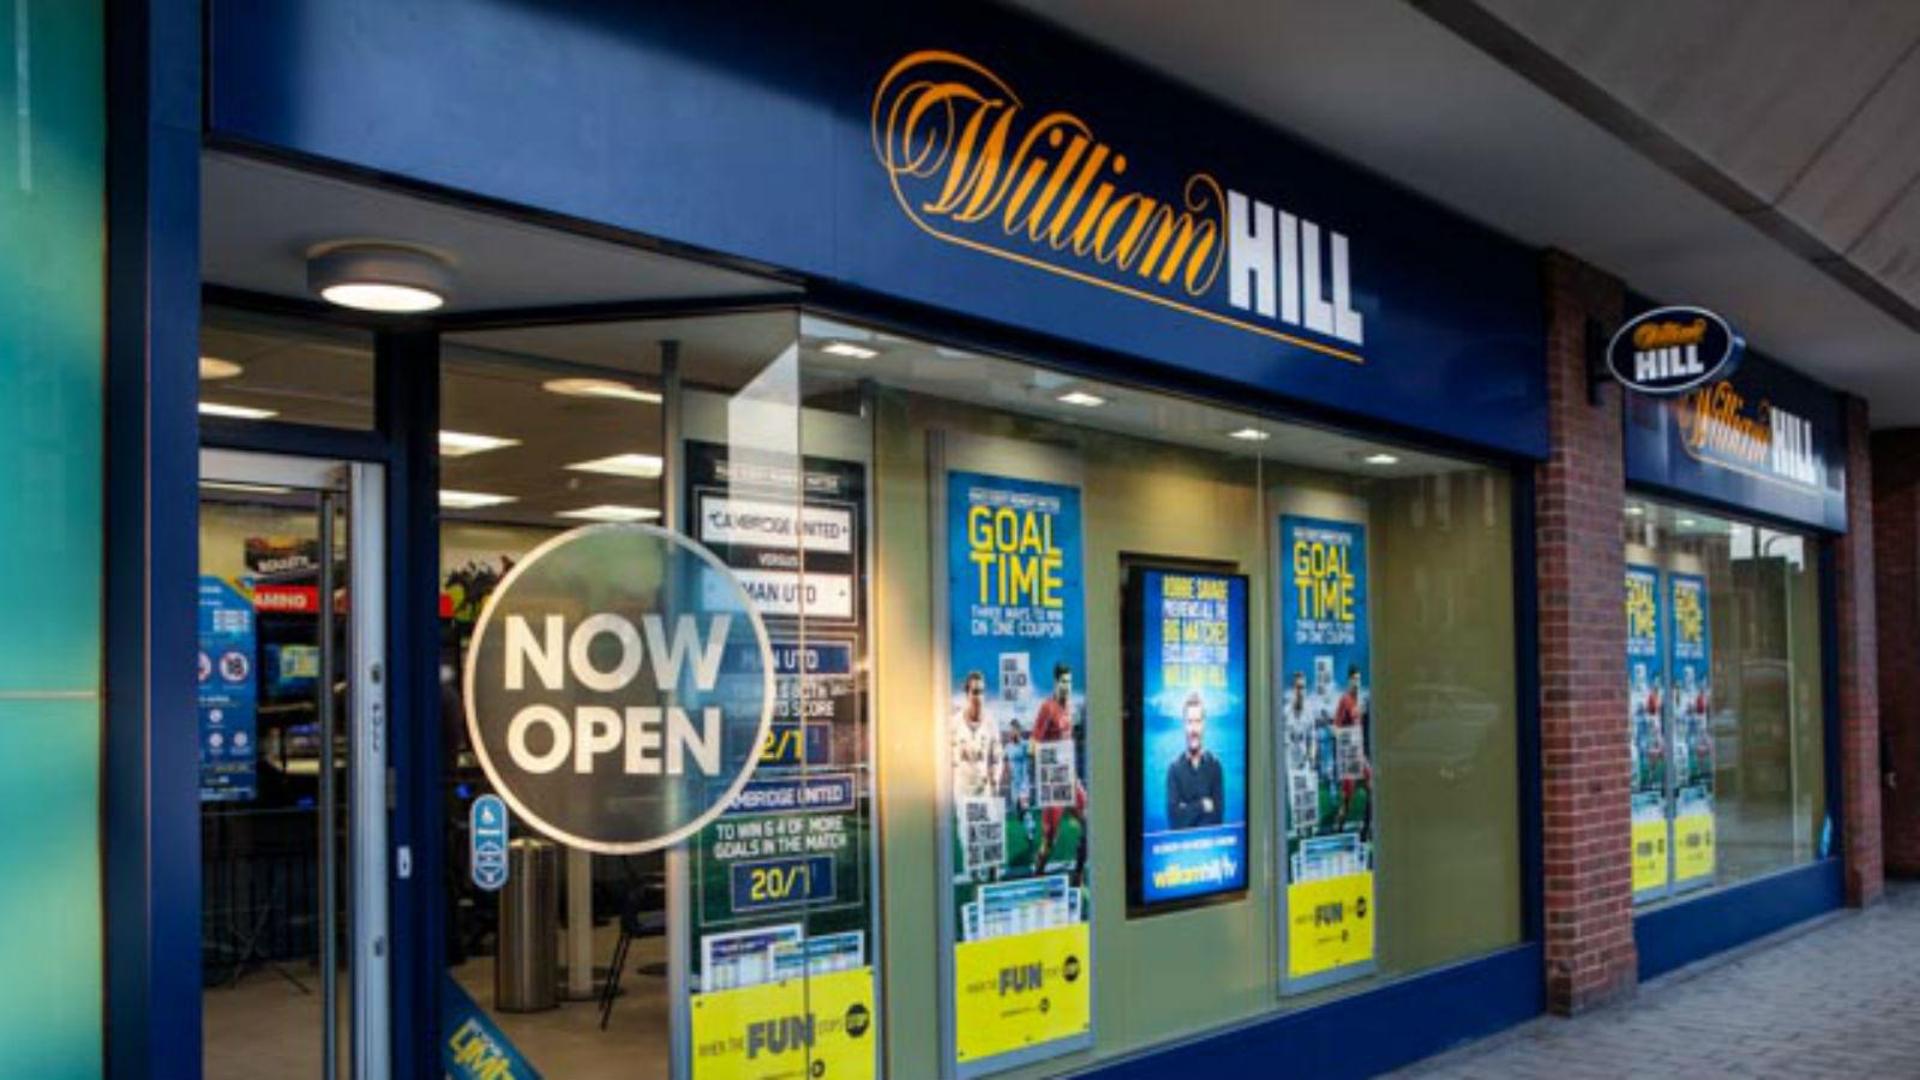 888 Holdings confirms “advanced discussions” to acquire William Hill’s European business